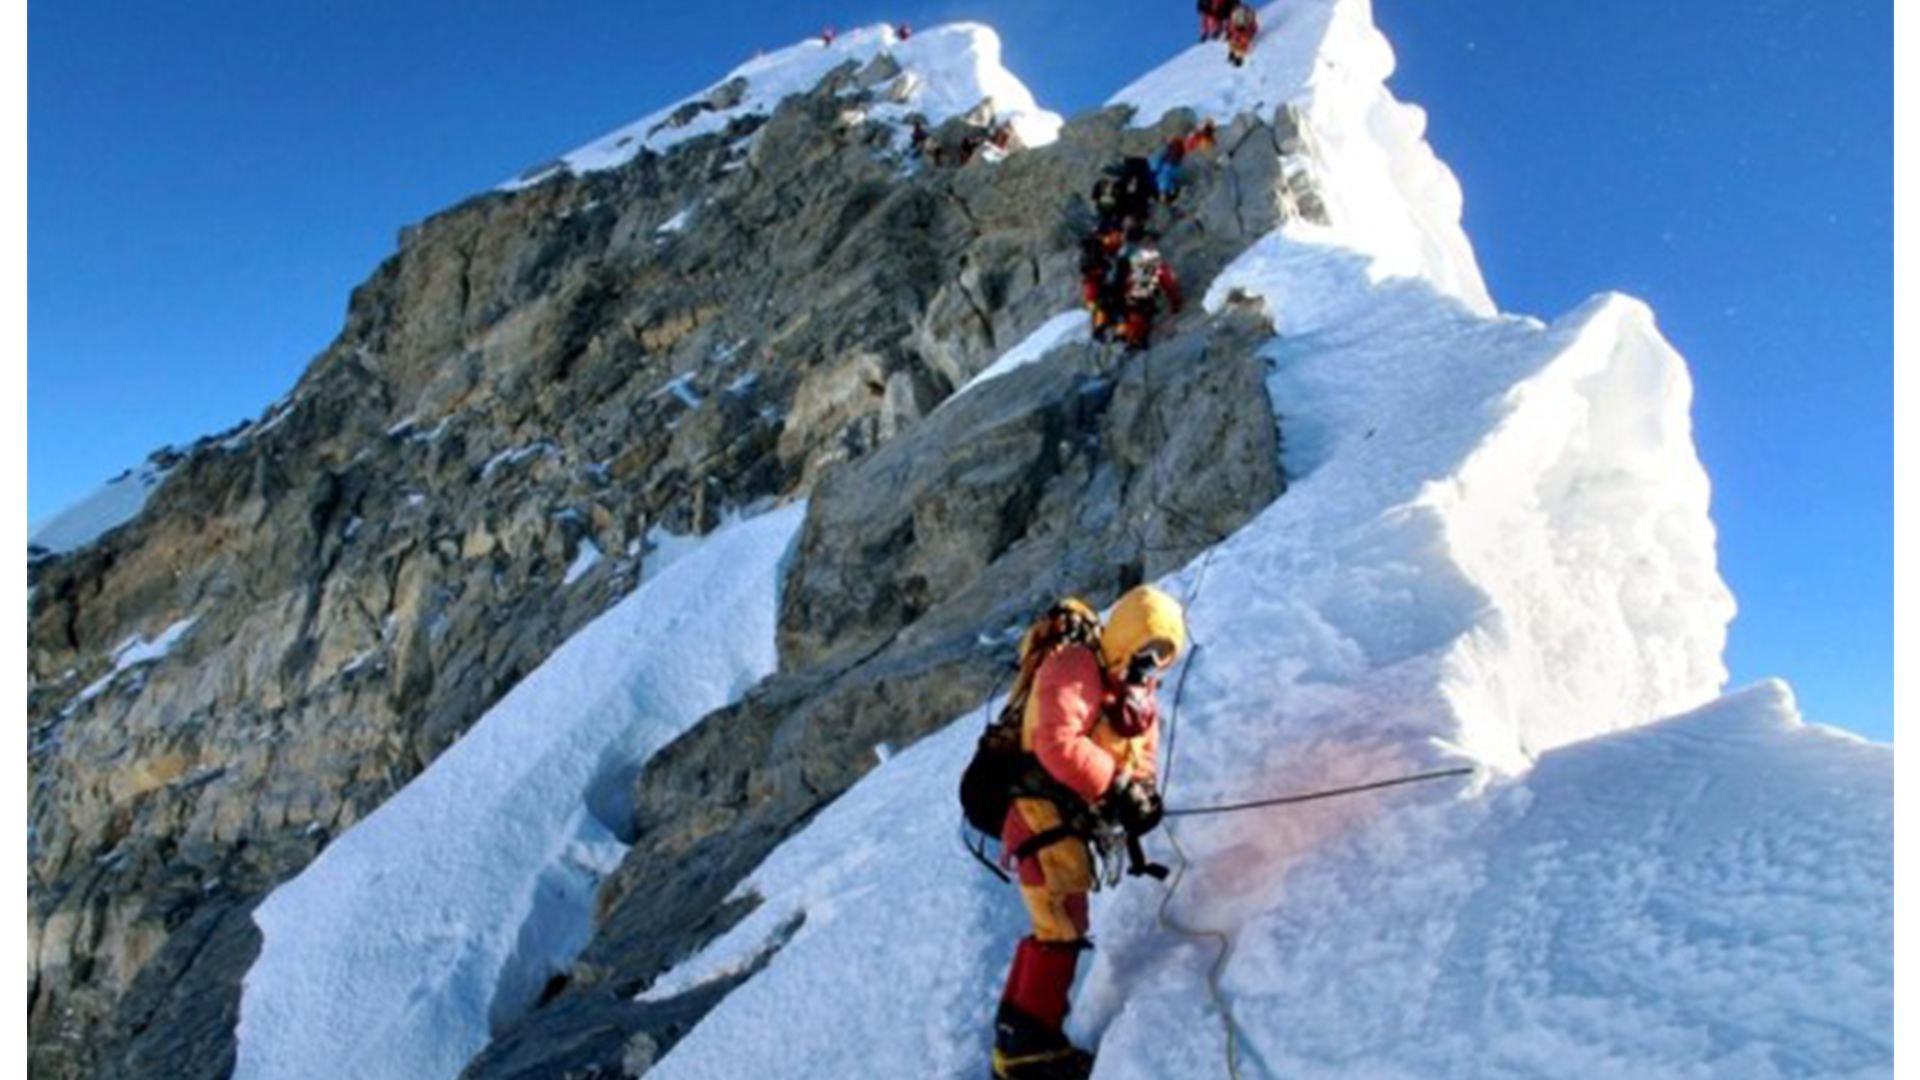 The new height of Everest is 8848.86 meters